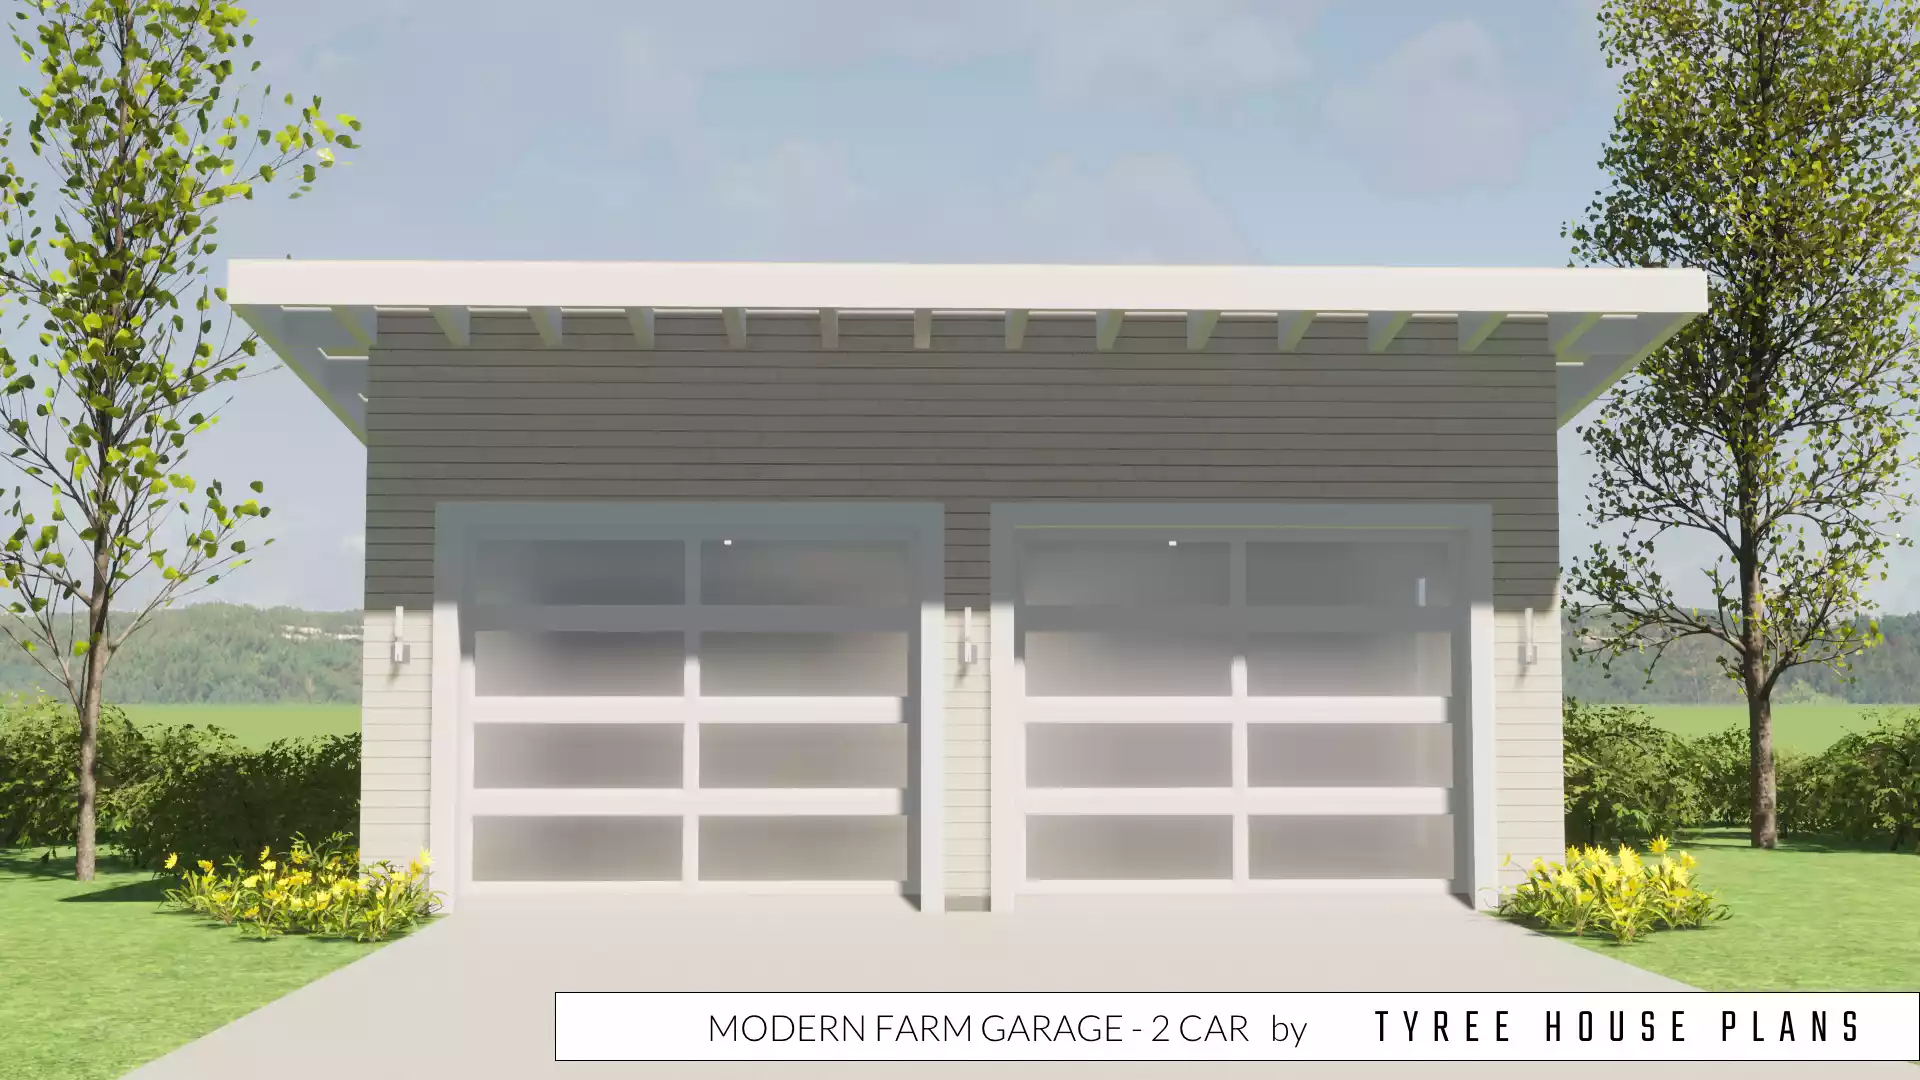 Modern Garage - 2 Car by Tyree House Plans